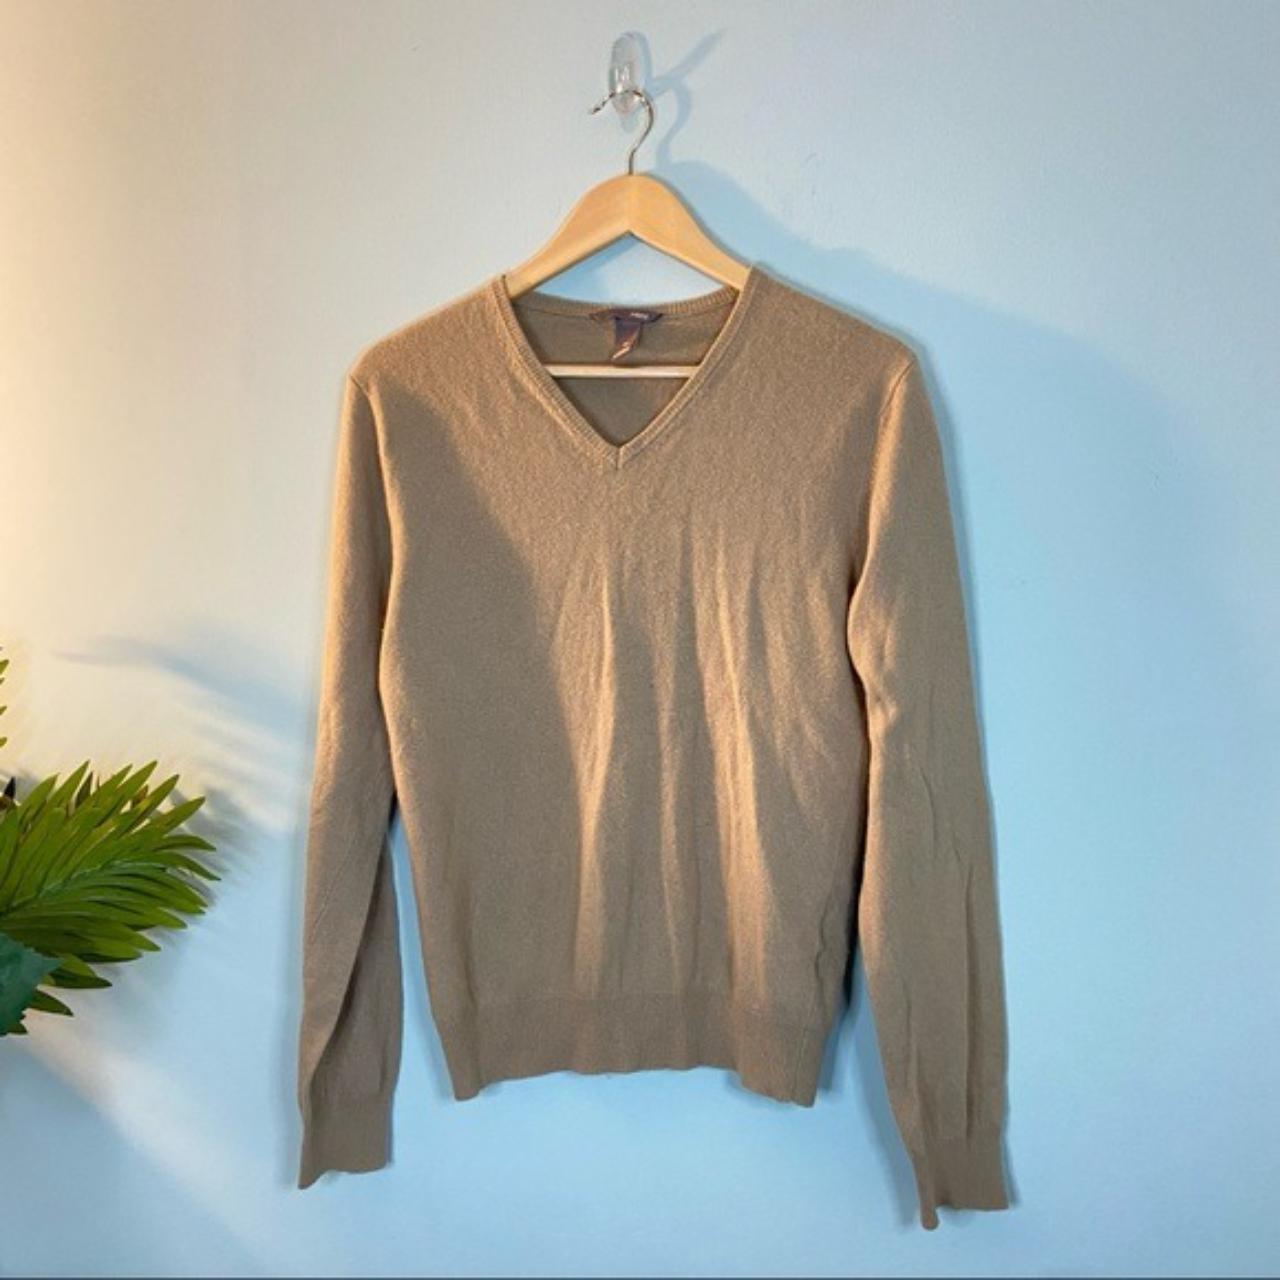 H&M Tan V Neck Cashmere and Lambswool Blend Sweater... - Depop